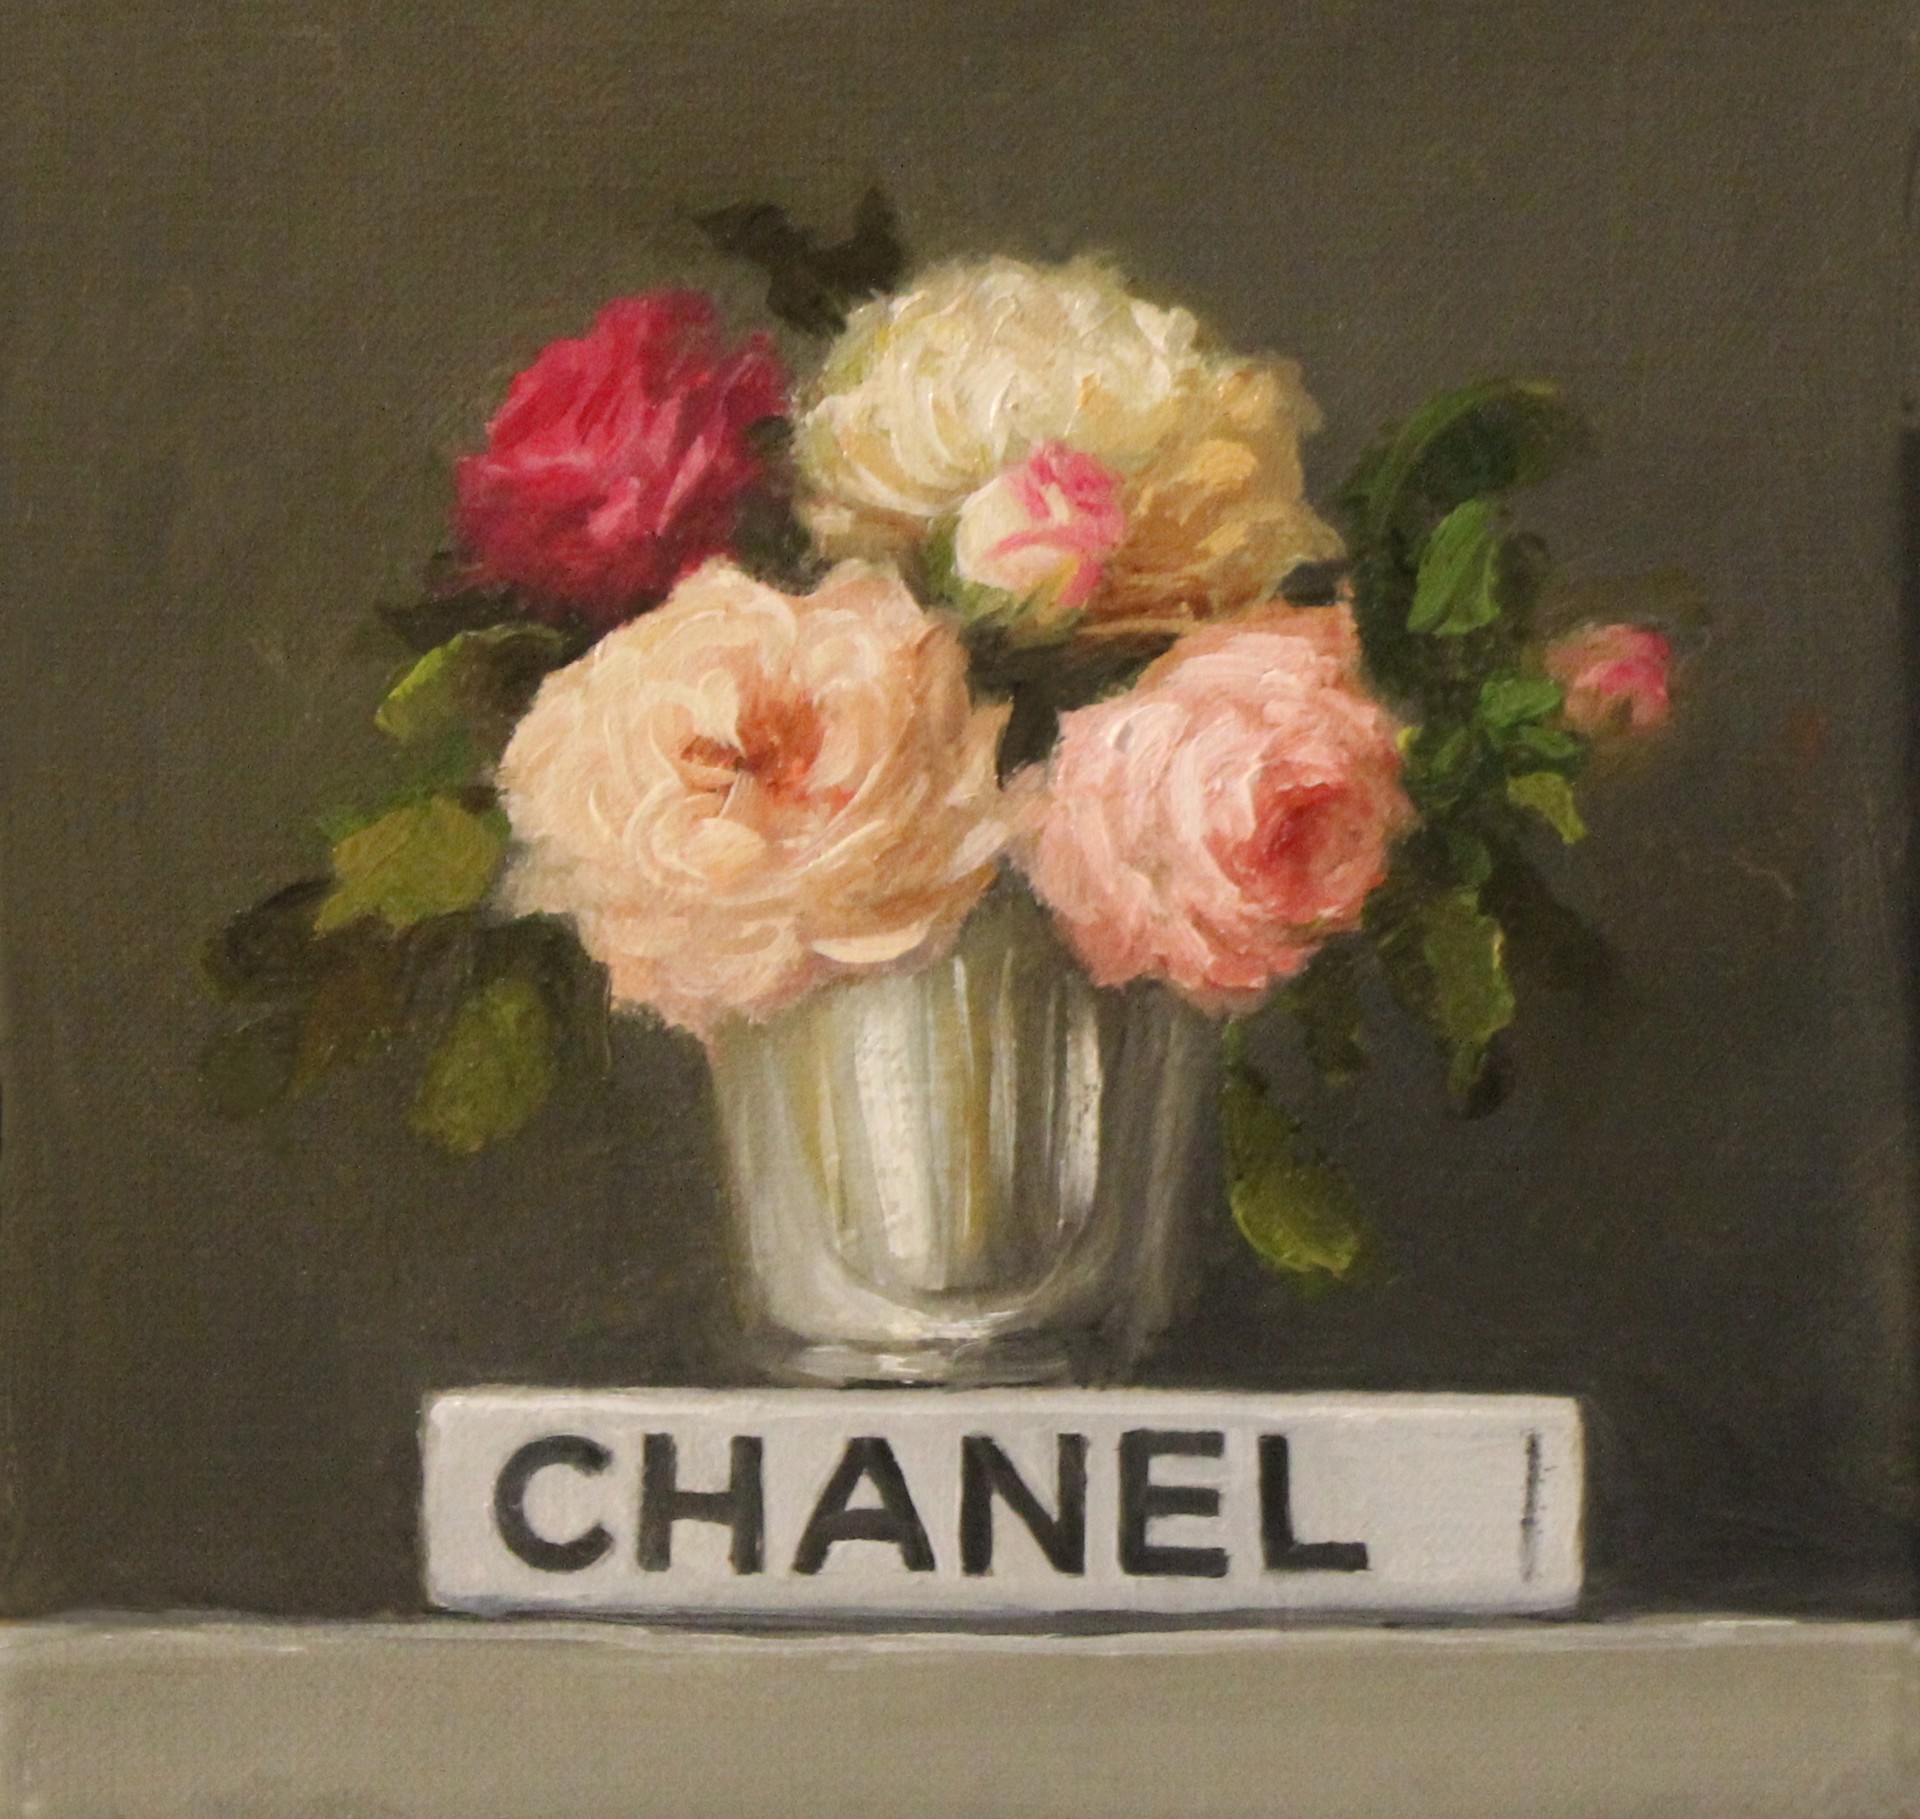 Chanel Book With Roses by Carolina Elizabeth